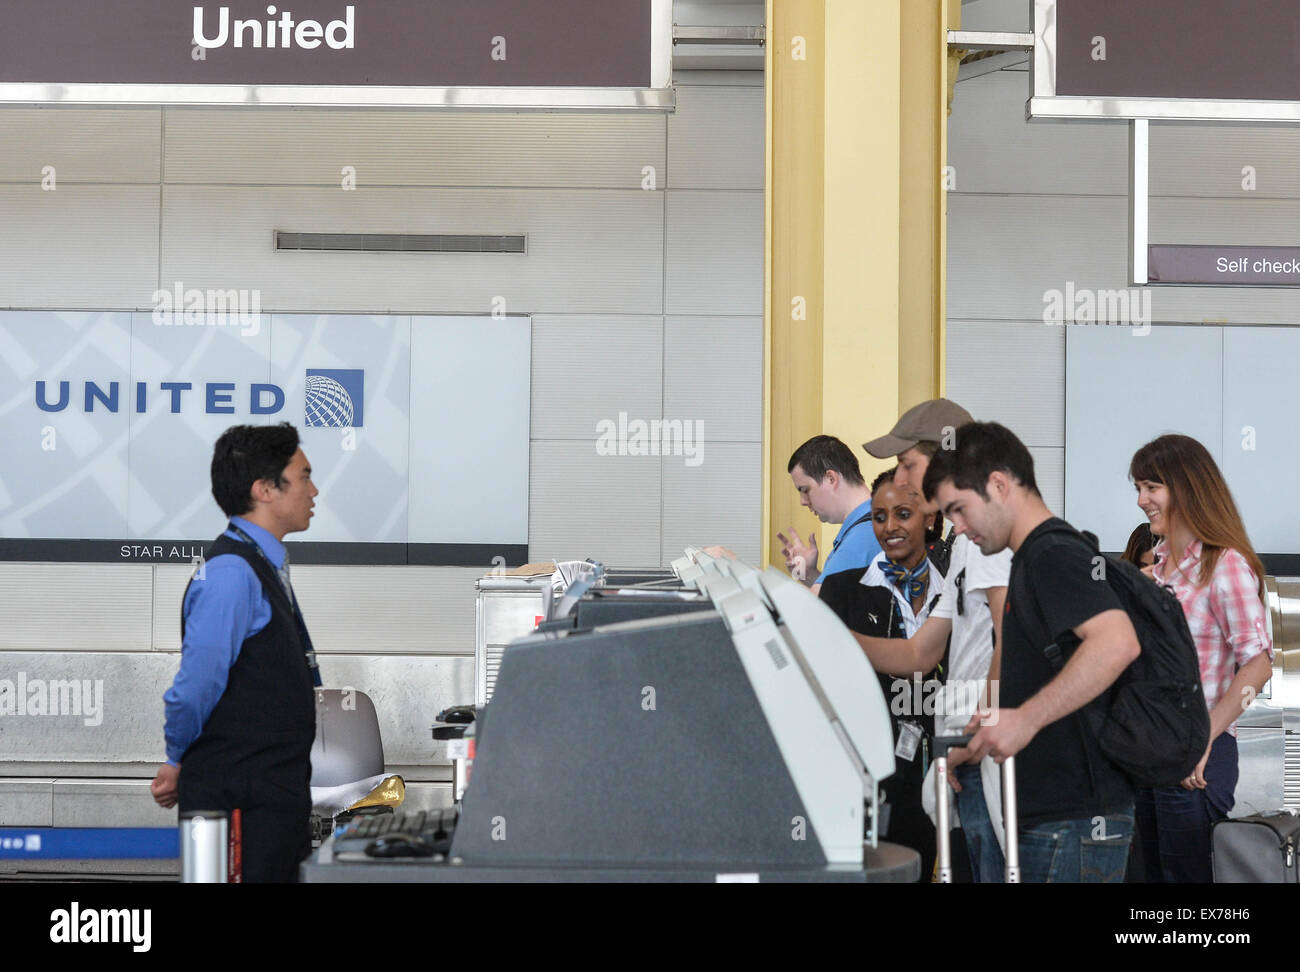 Washington, DC, USA. 8th July, 2015. Passengers print boarding cards with United Airlines at Ronald Reagan Washington National Airport in Washington, DC, the United States, on July 8, 2015. United Airlines (UA) resumed flights at all airports that had been grounded Wednesday morning for about two hours due to a computer glitch, according to the U.S. Federal Aviation Administration (FAA). Credit:  Bao Dandan/Xinhua/Alamy Live News Stock Photo